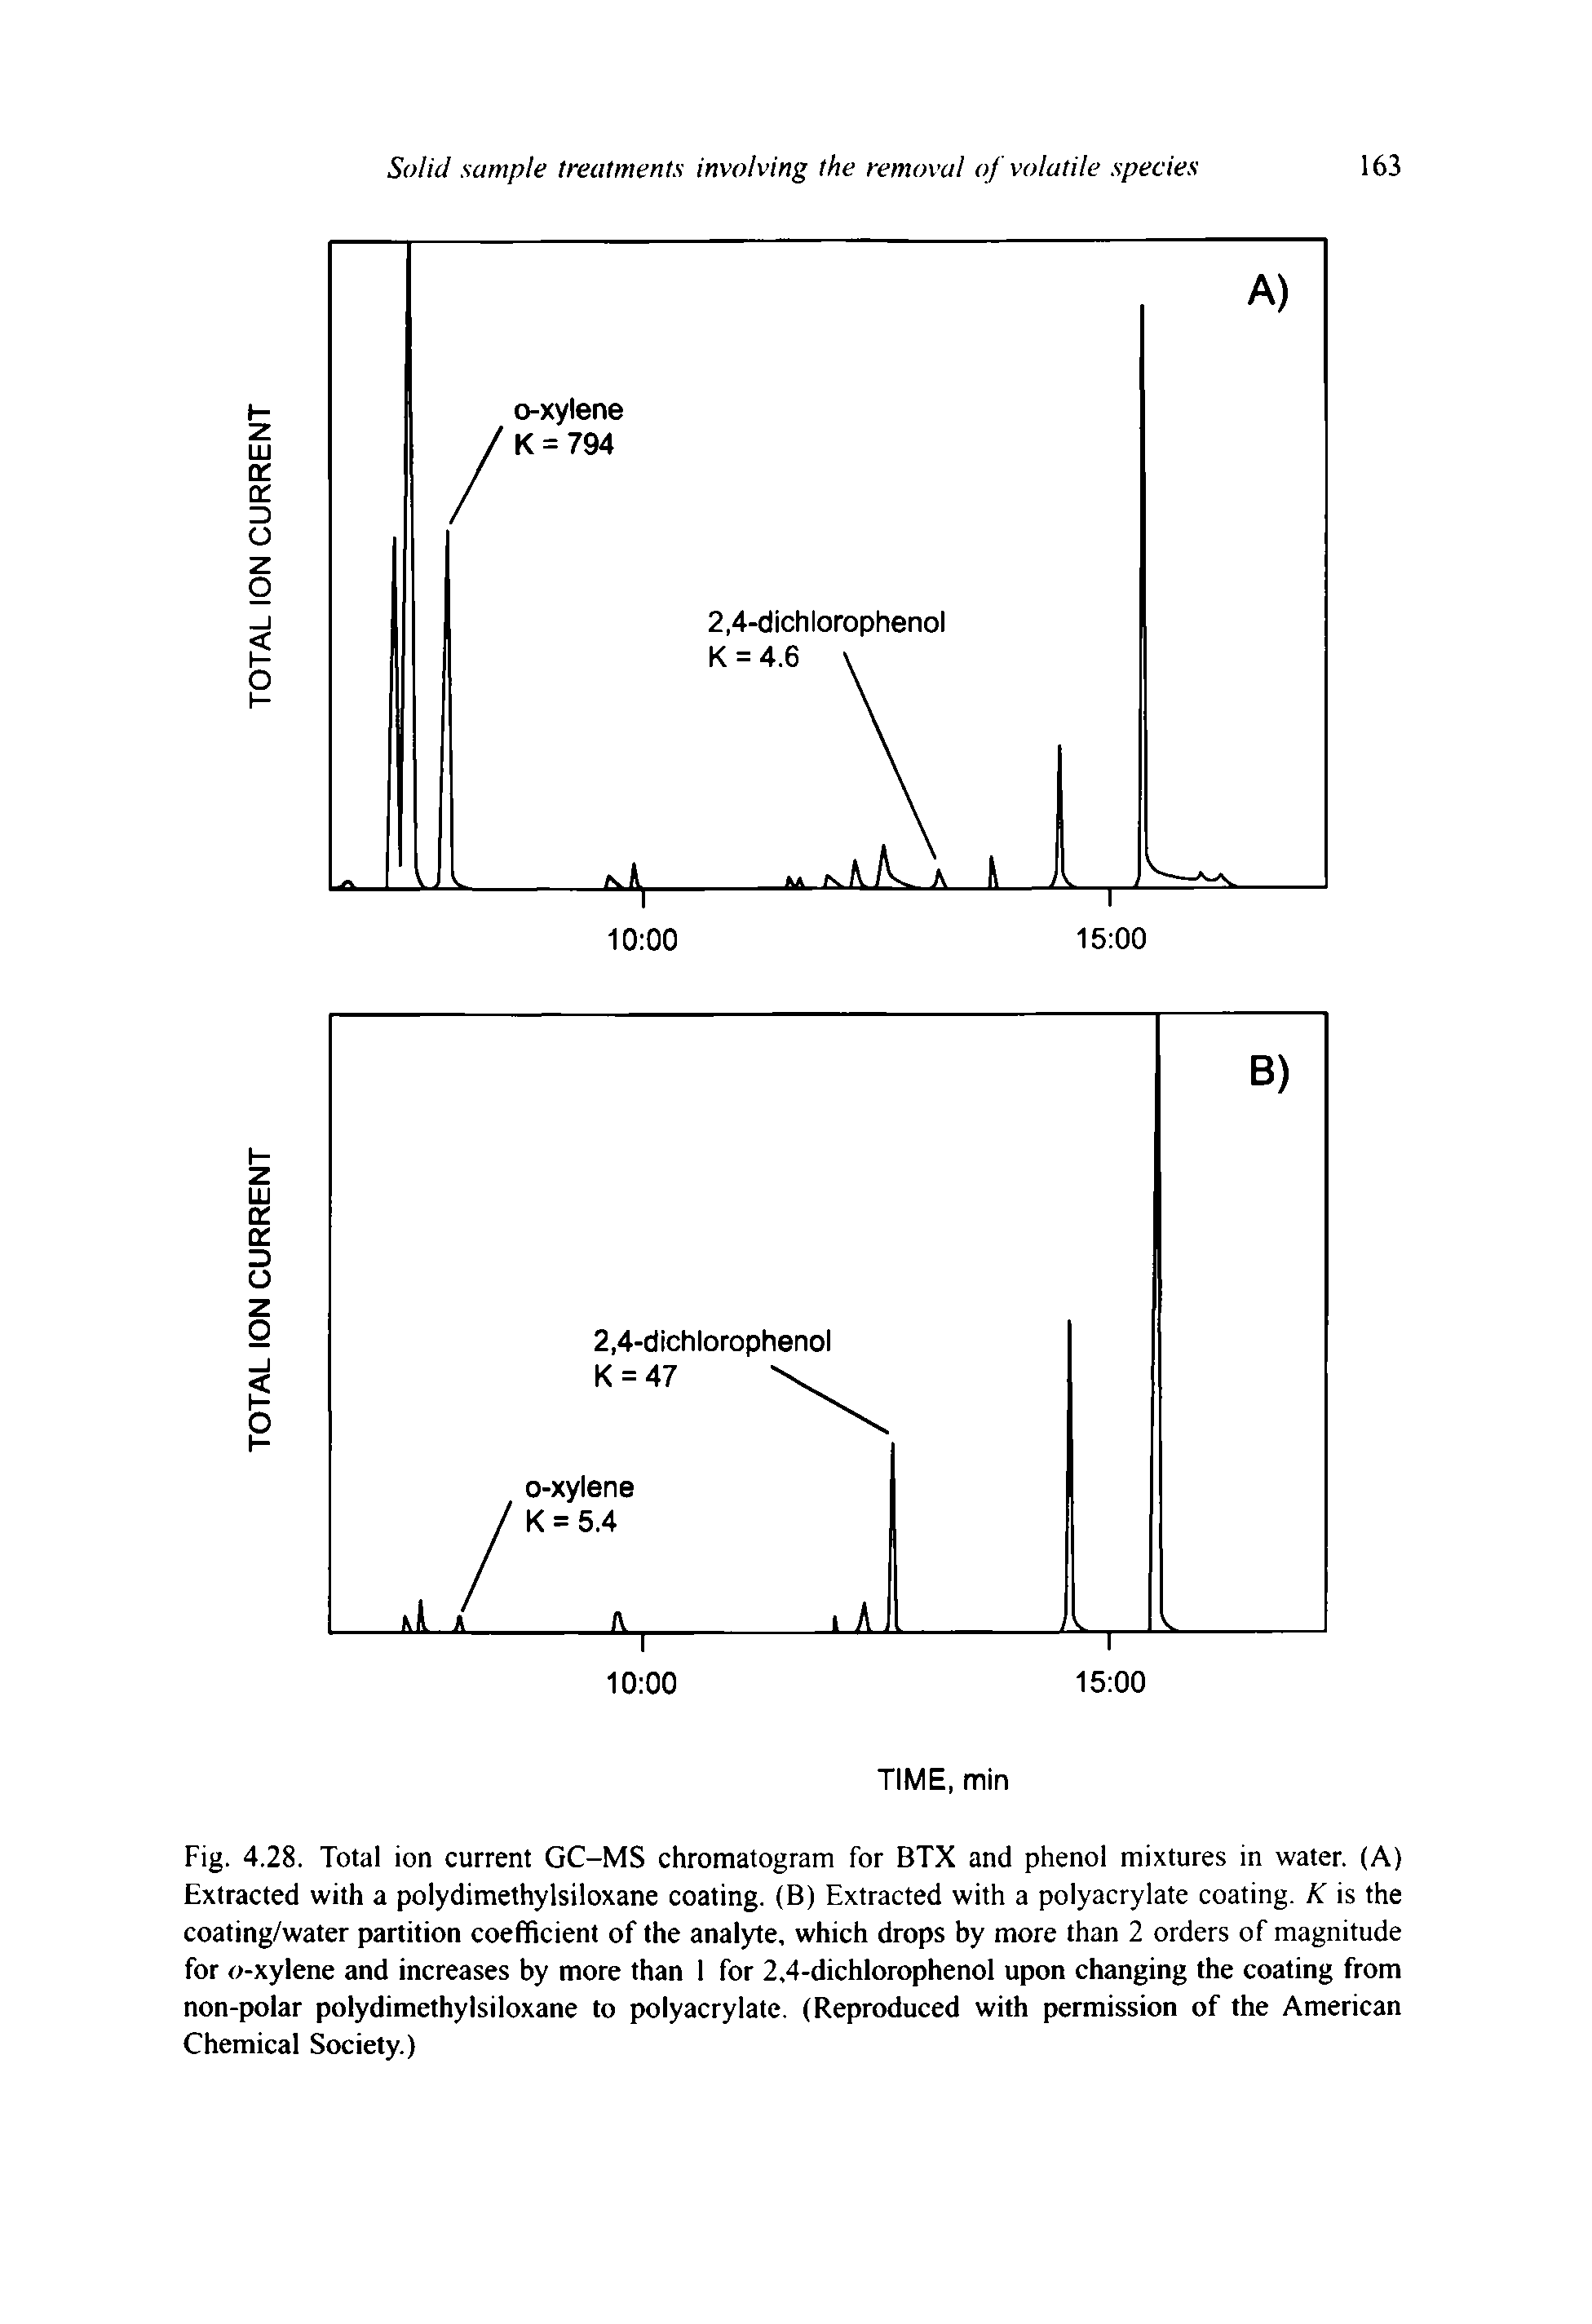 Fig. 4.28. Total ion current GC-MS chromatogram for BTX and phenol mixtures in water. (A) Extracted with a polydimethylsiloxane coating. (B) Extracted with a polyacrylate coating. K is the coating/water partition coefficient of the analyte, which drops by more than 2 orders of magnitude for o-xylene and increases by more than 1 for 2,4-dichlorophenol upon changing the coating from non-polar polydimethylsiloxane to polyacrylate. (Reproduced with permission of the American Chemical Society.)...